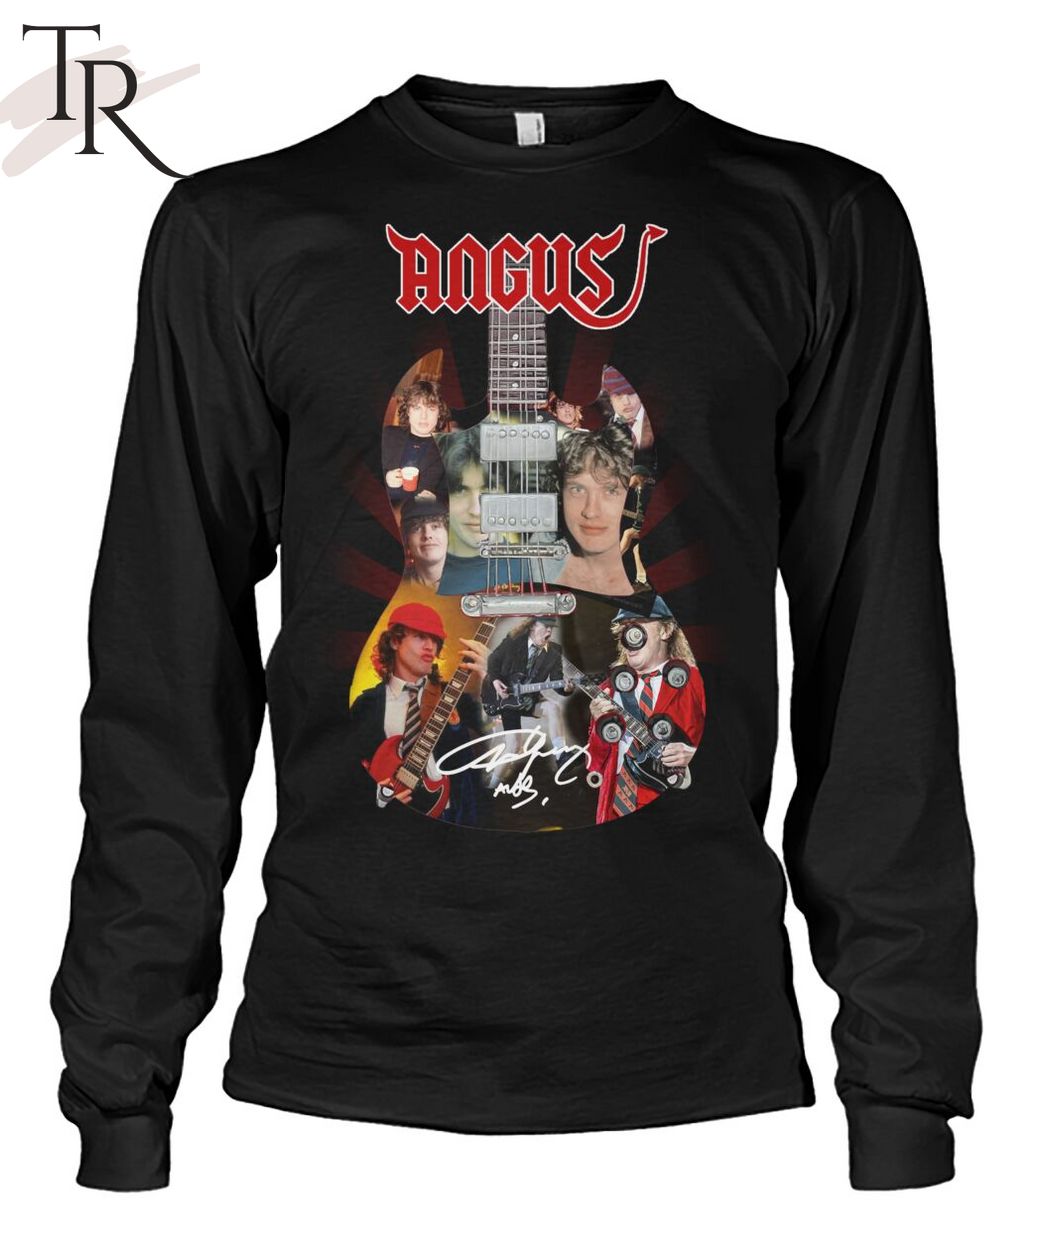 ACDC Band T-Shirt Angus Rock Young Torunstyle -